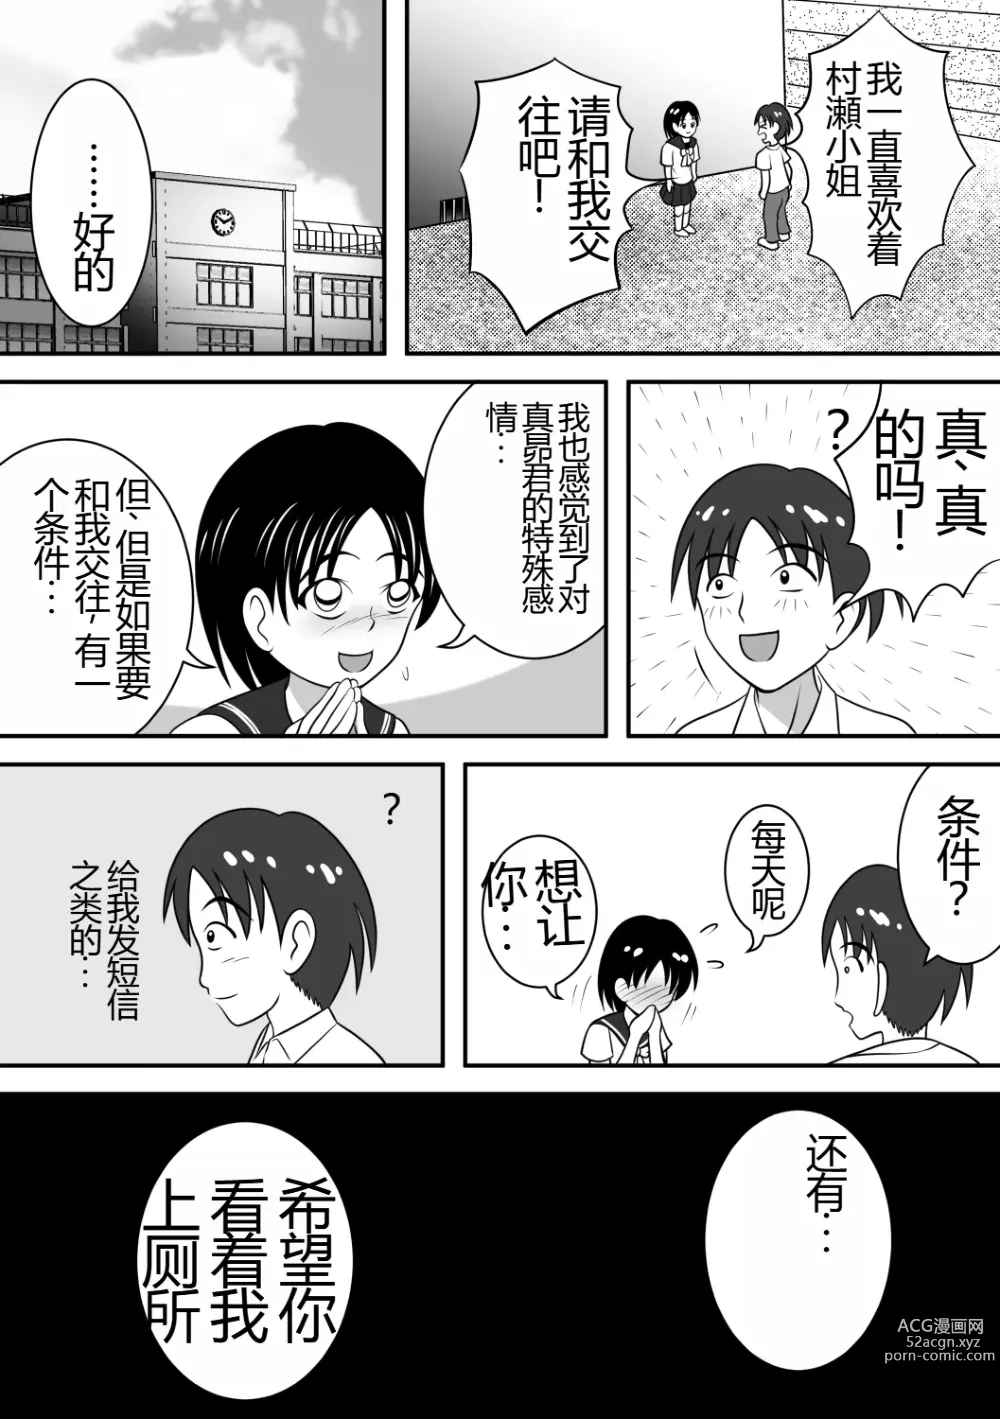 Page 3 of doujinshi 毫无保留的女孩